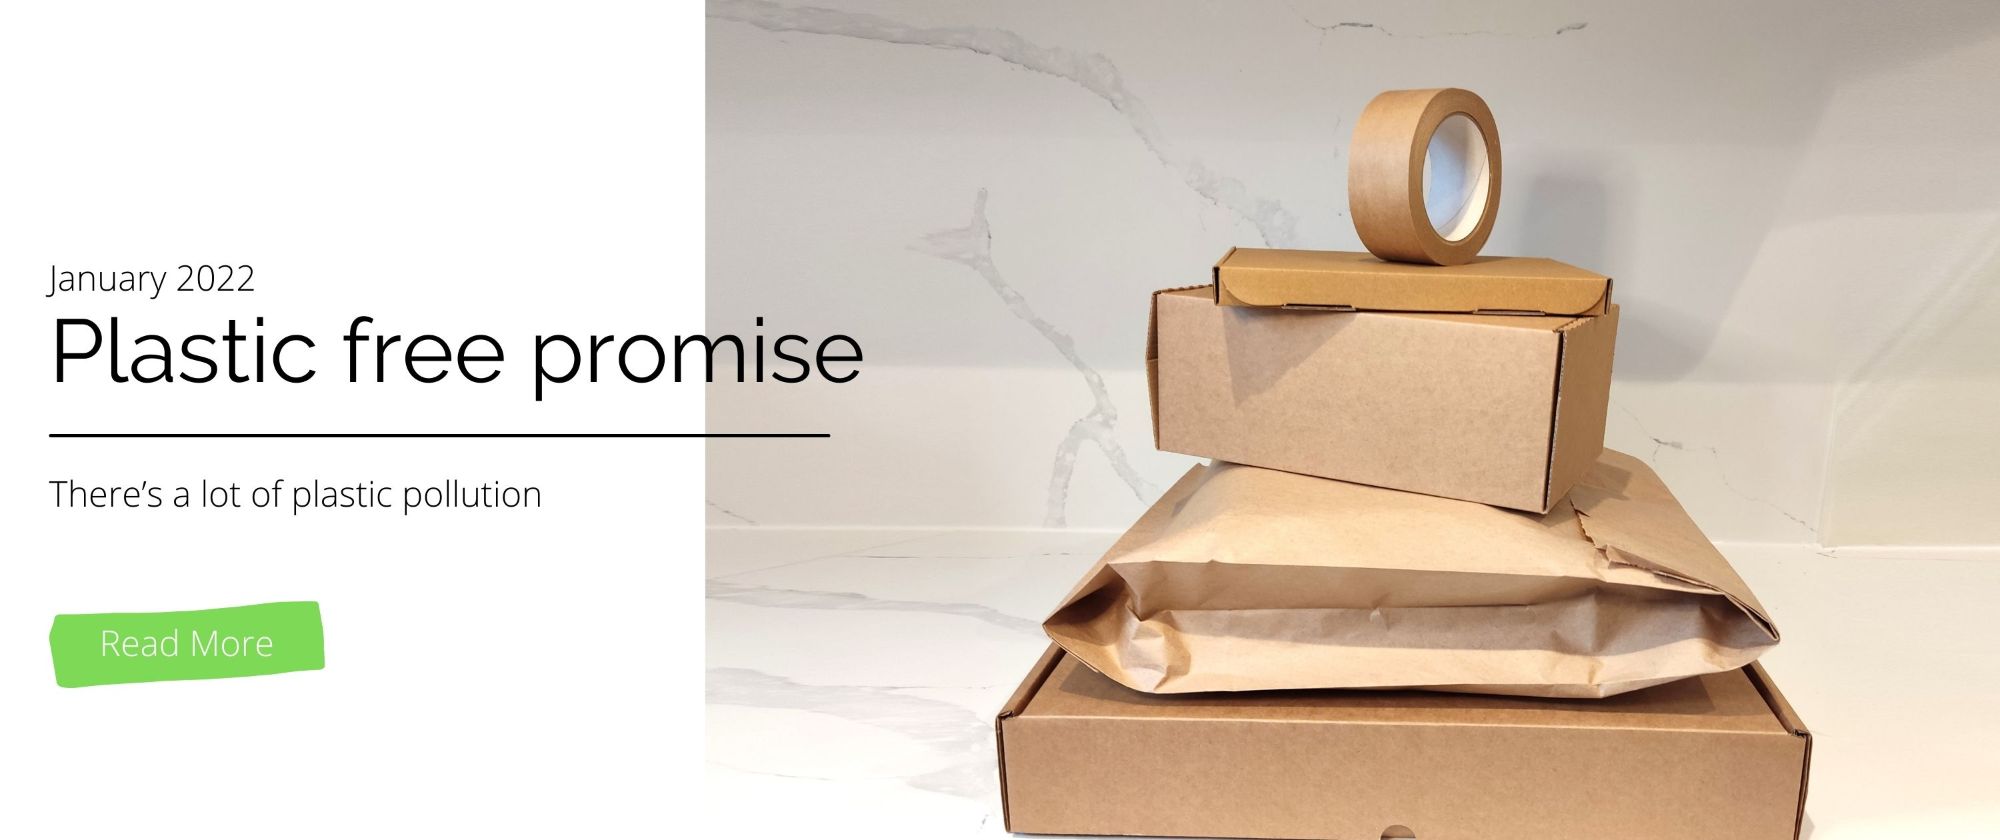 Our breastfeeding clothes and our packaging free promise